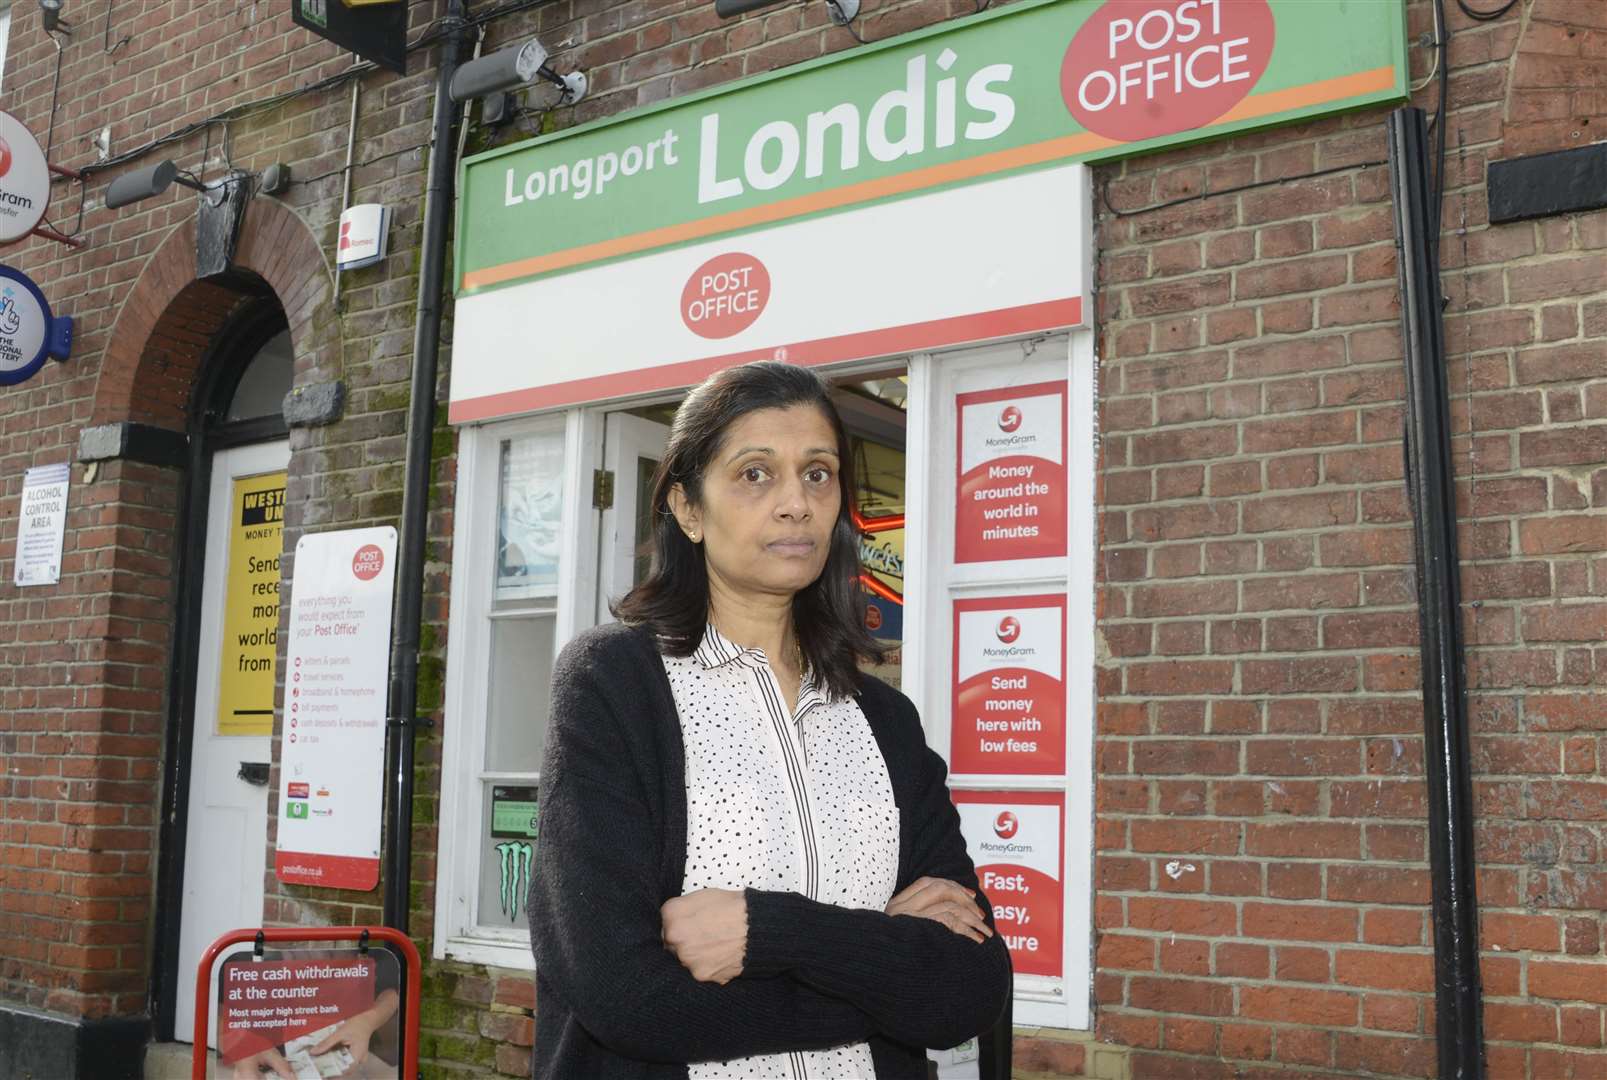 Owner Kirti Patel is upset after a series of tragedies have befallen her Londis store